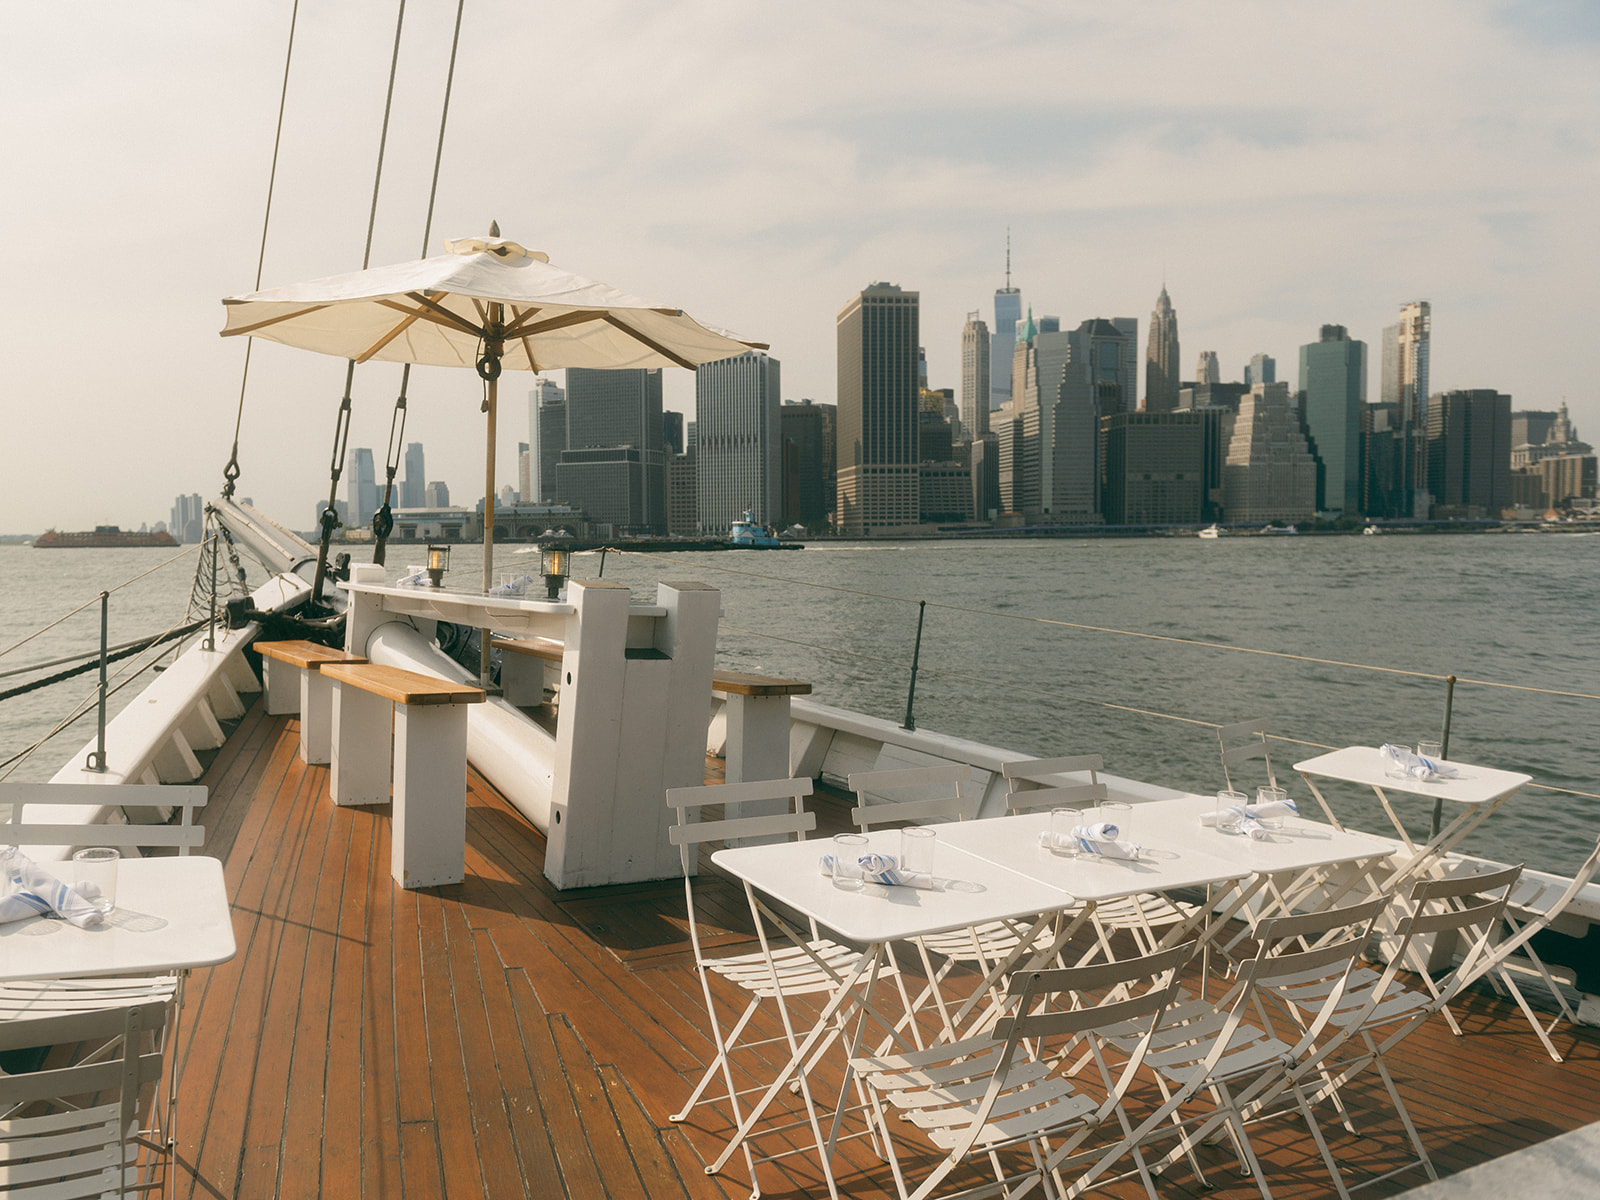 Discover the allure of Pilot Brooklyn! Join us for a venue tour of the 1924 Schooner ship docked at Pier 6. 